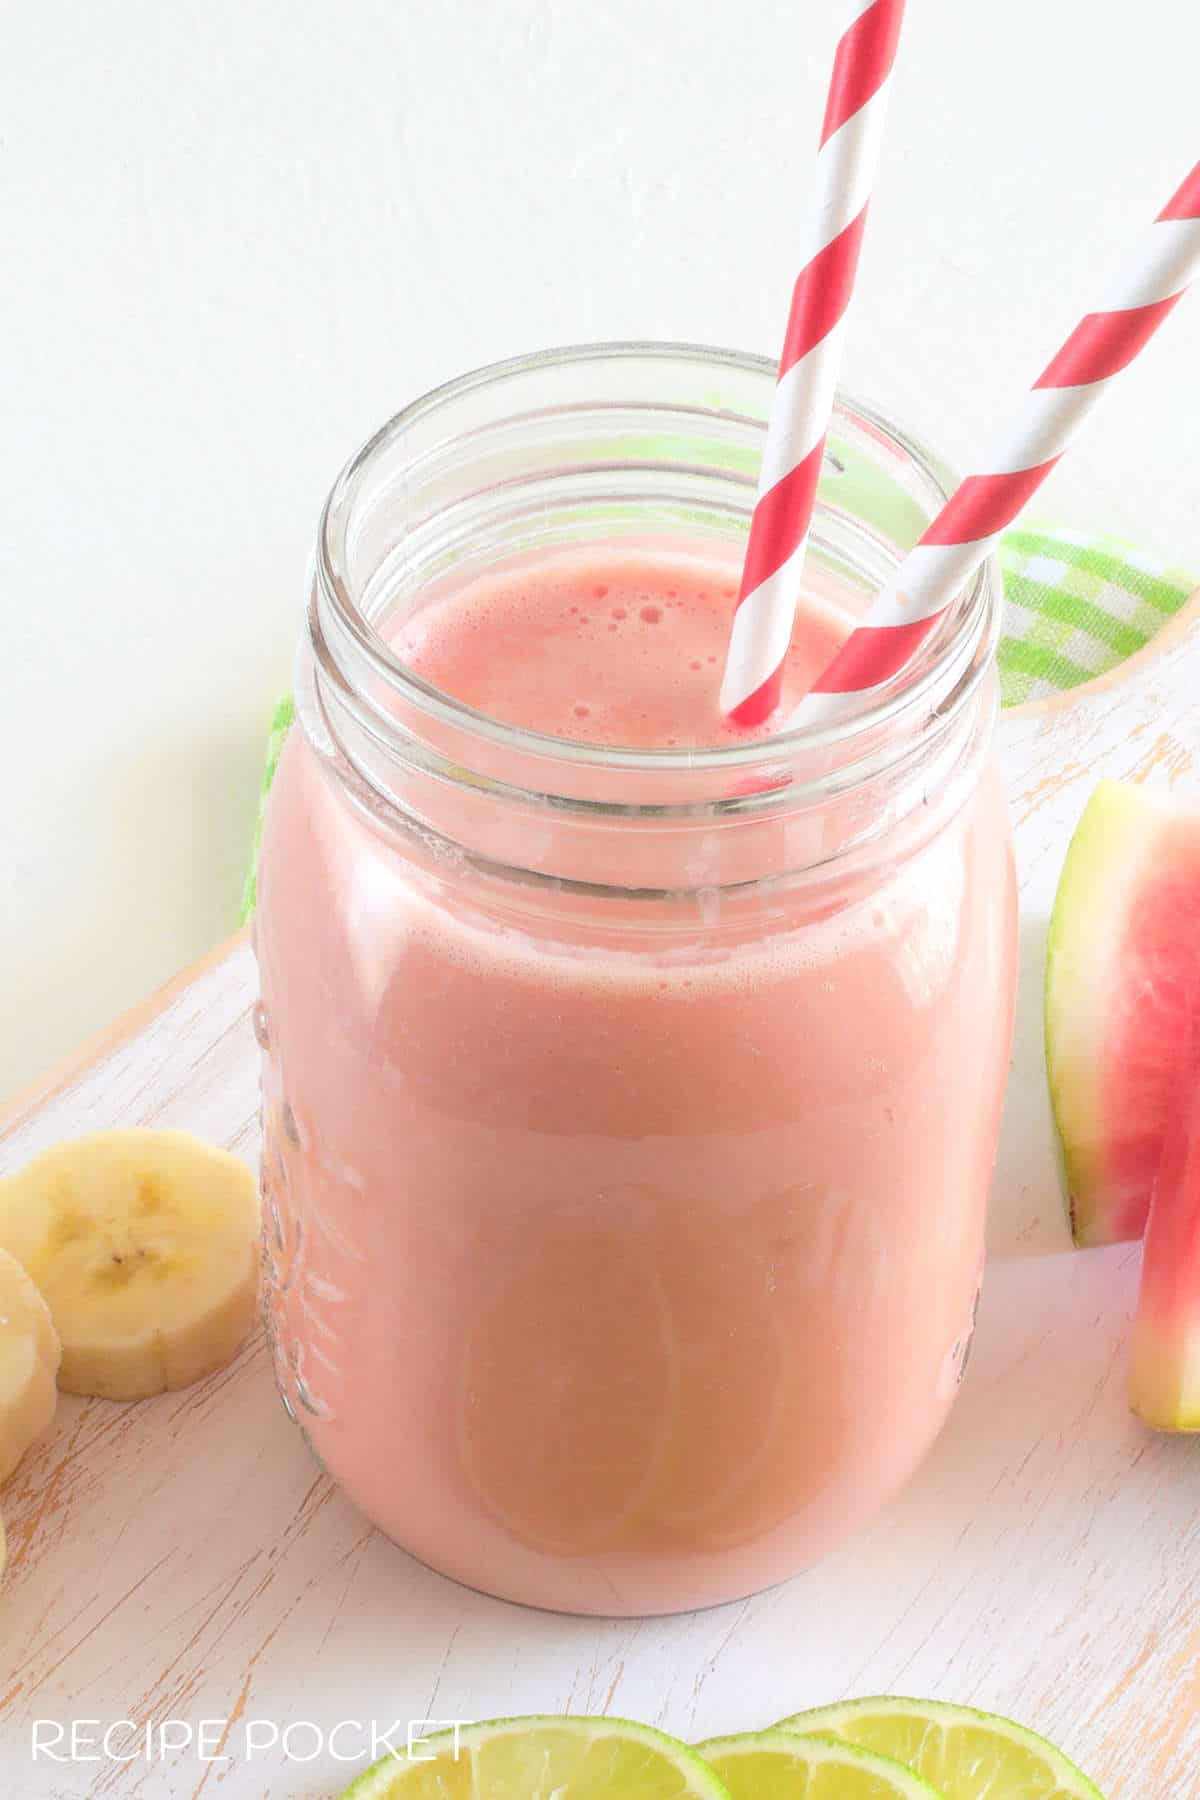 Smoothie drink.